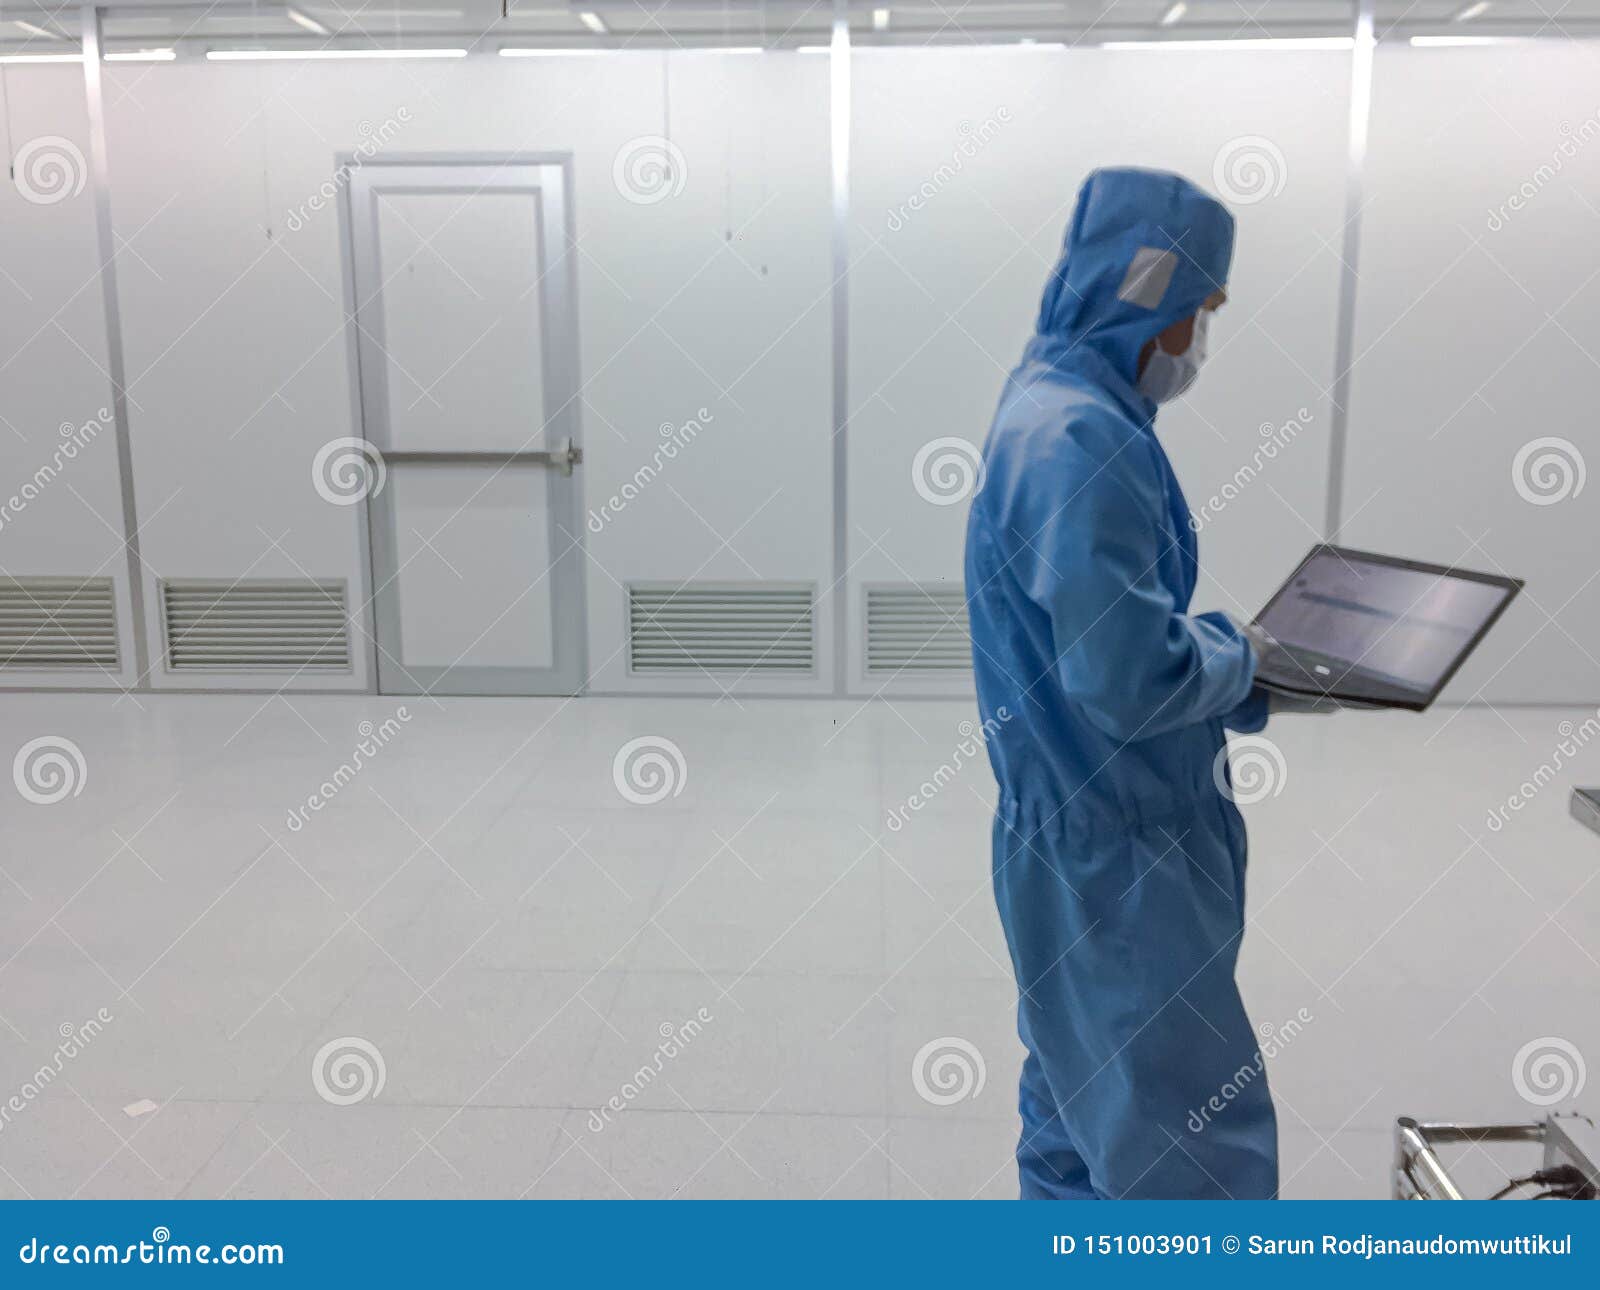 Blurred Engineer Inside Clean Room Class 1000 With Emergency